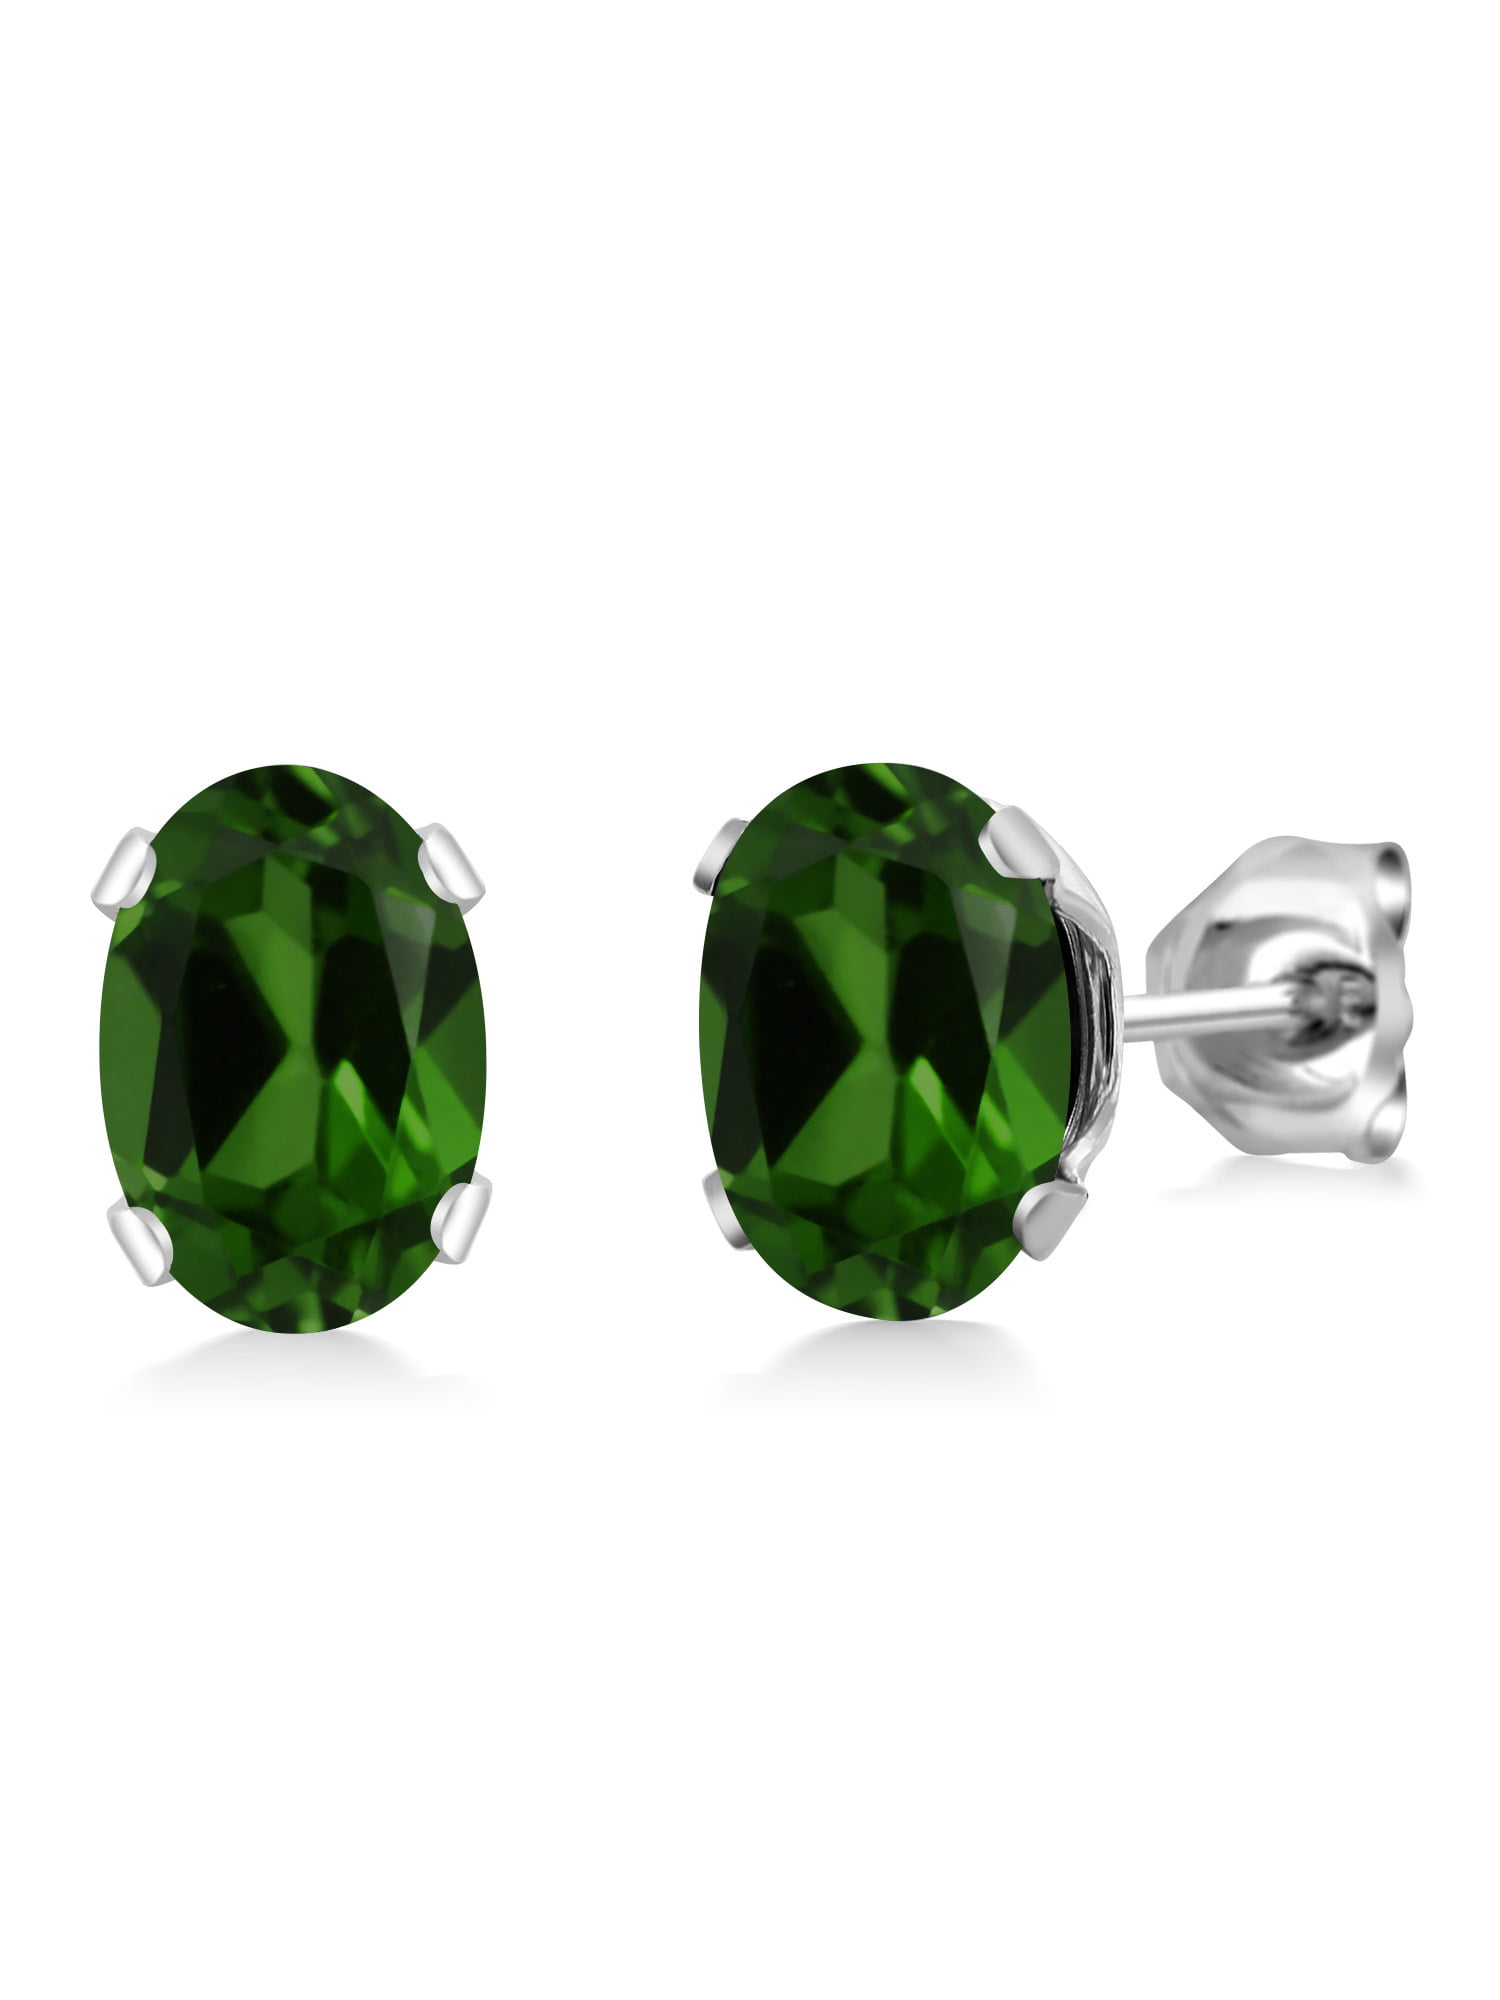 1.60 Ct Oval Green Chrome Diopside 925 Sterling Silver Leverback Earrings